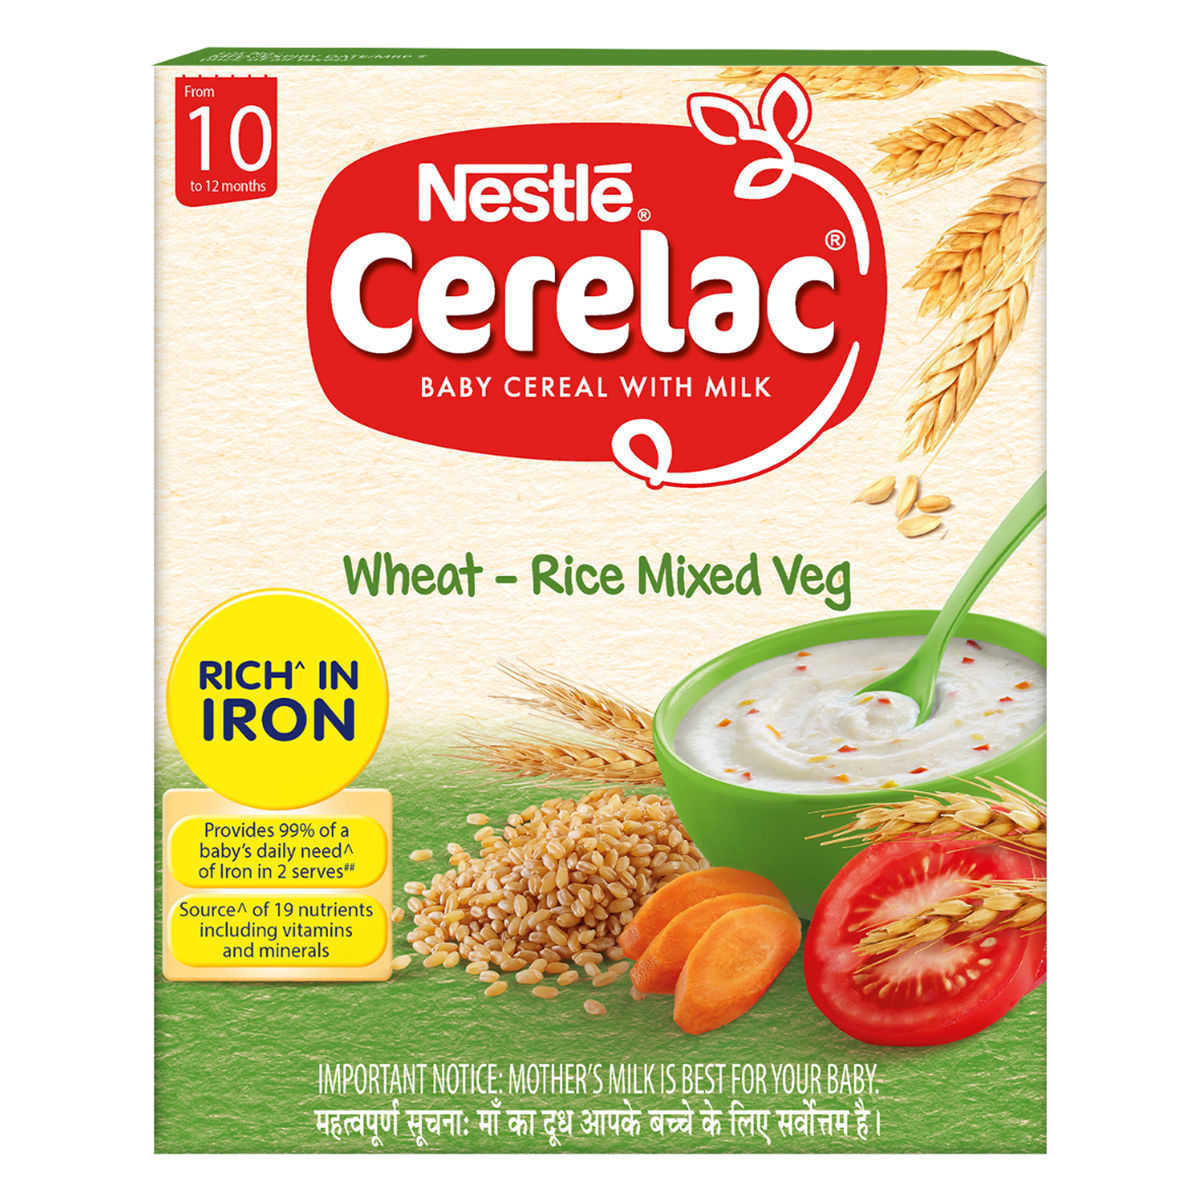 Buy Nestle Cerelac Baby Cereal with Milk Wheat Rice Mixed Veg (From 10 to 12 Months) Powder, 300 gm Refill Pack Online